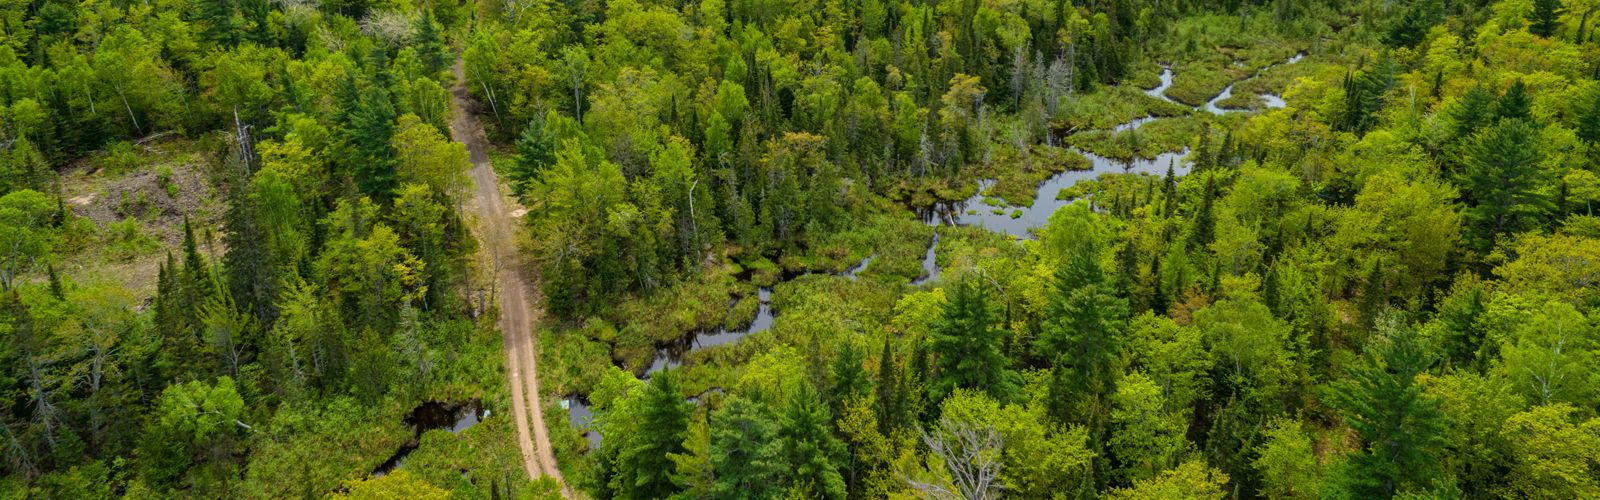 A river winds through a lush green forest in the recently acquired lands in the Keweenaw Peninsula.